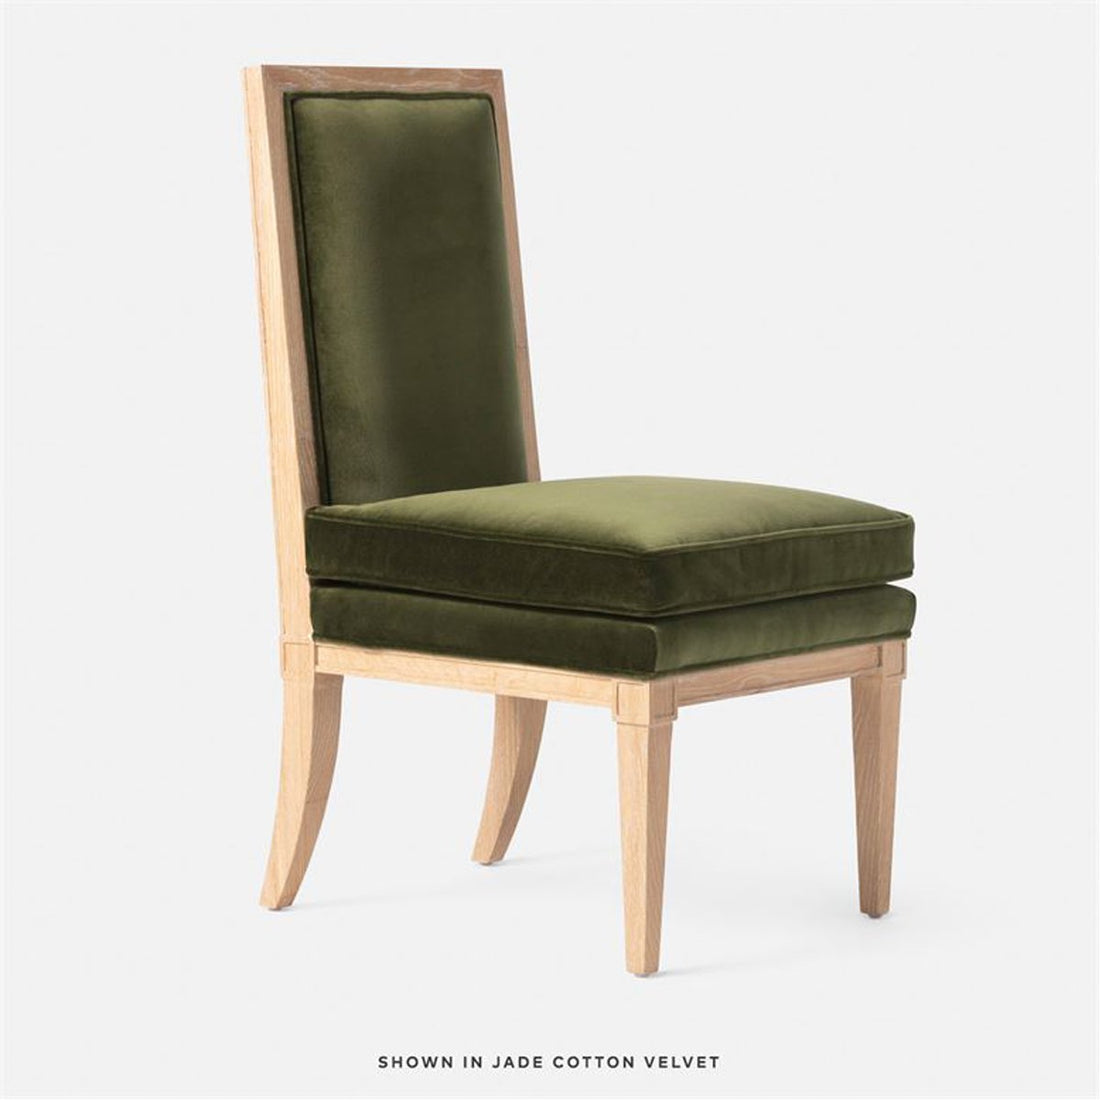 Made Goods Evan Dining Chair in Rhone Navy Leather